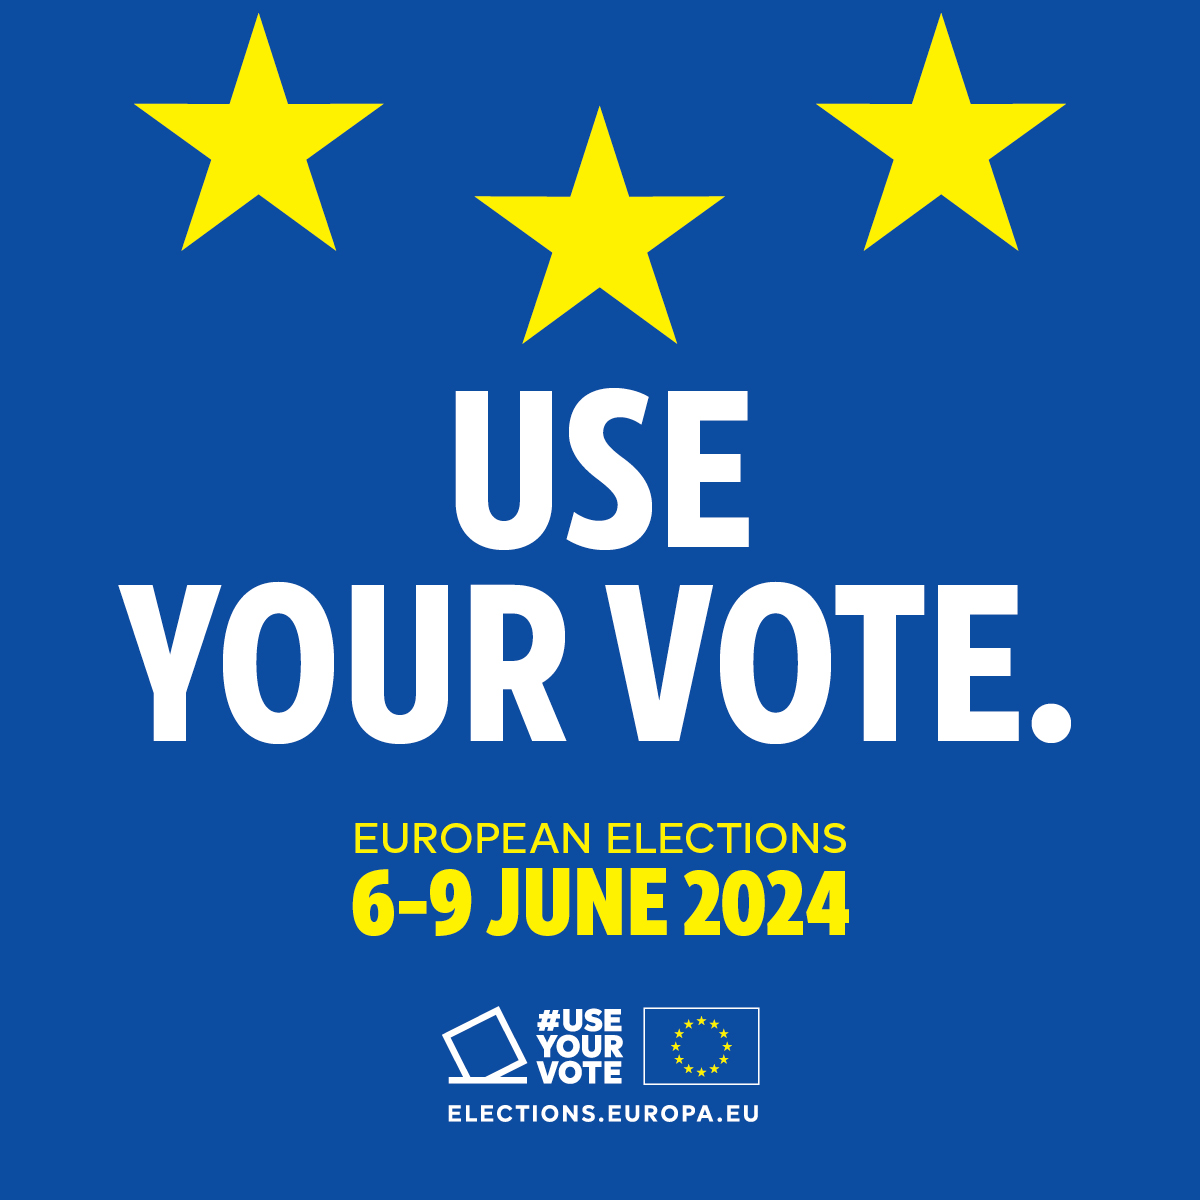 The European Parliament is the only EU body directly elected by voters. And the time to vote is coming very soon. Vote on 6-9 June → elections.europa.eu The more people vote, the stronger democracy becomes. #UseYourVote #EUelections2024